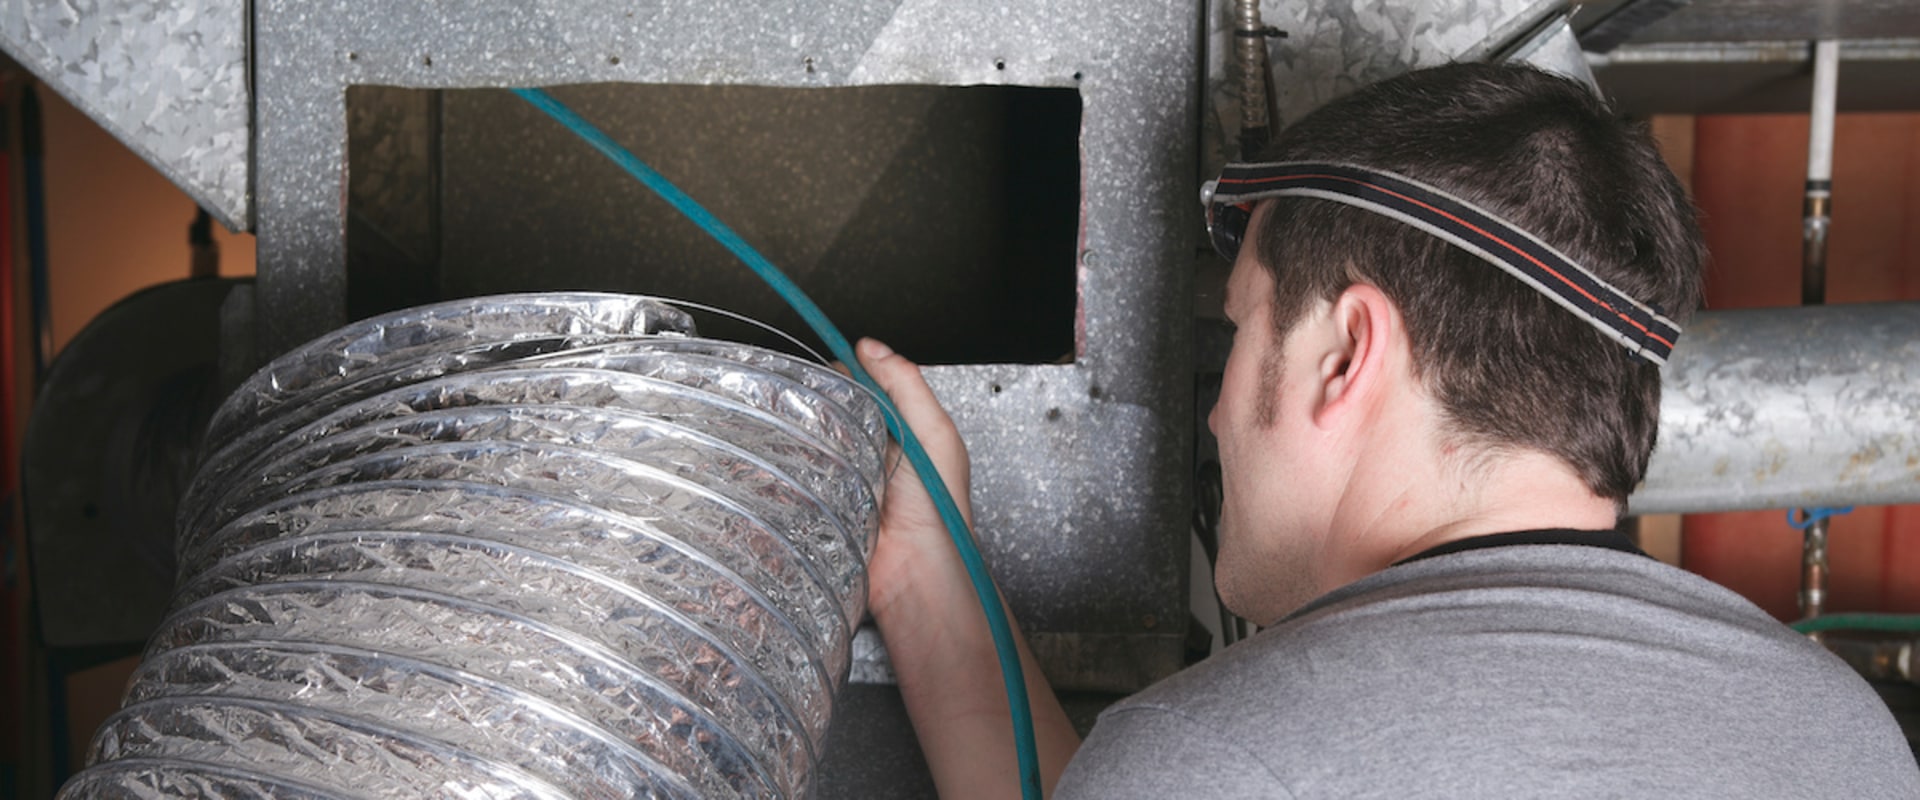 Dryer Vent Cleaning in Palm Beach, Florida: What You Need to Know